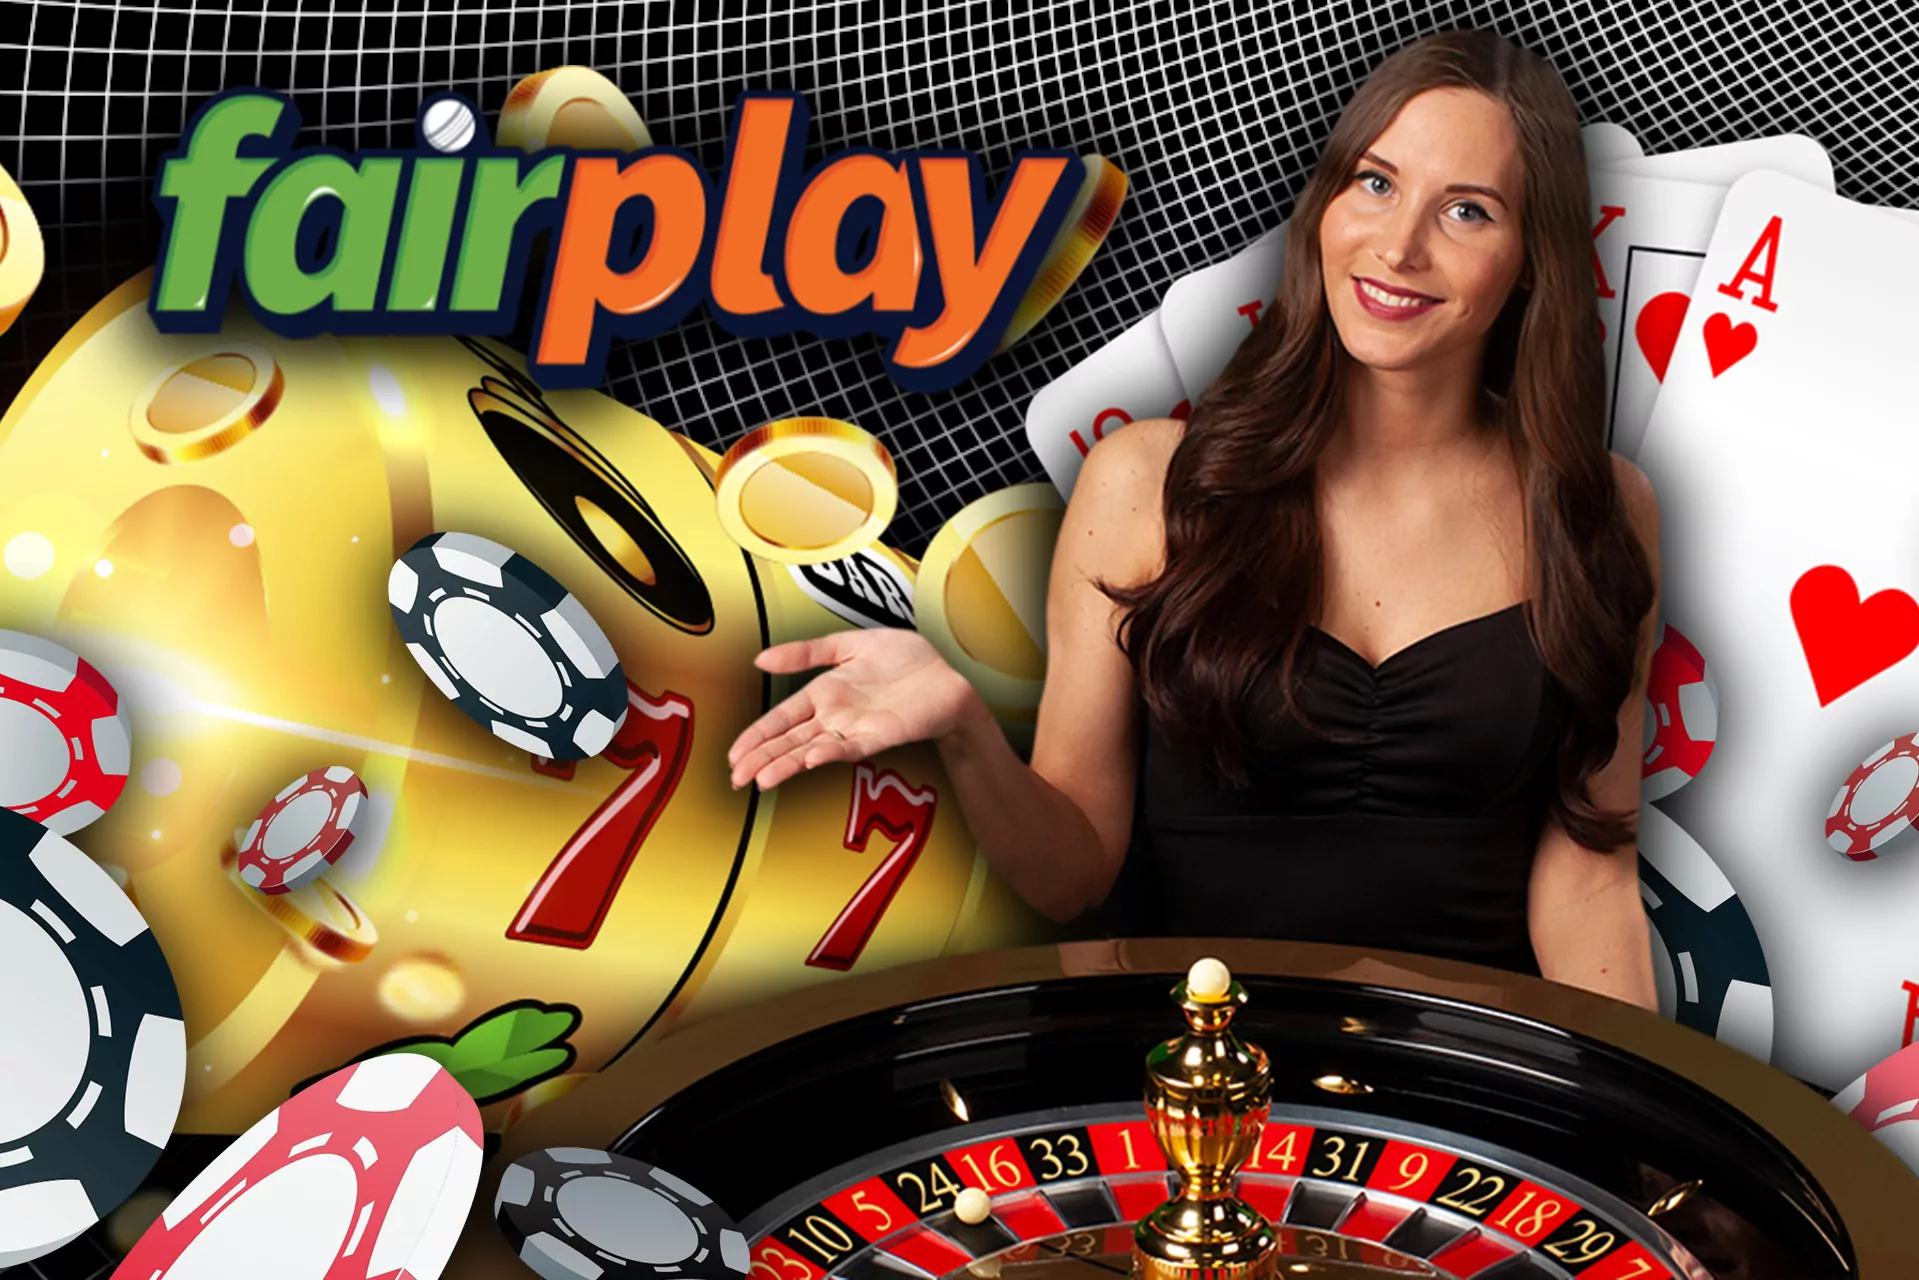 Play your favorite slots and games with real dealers.